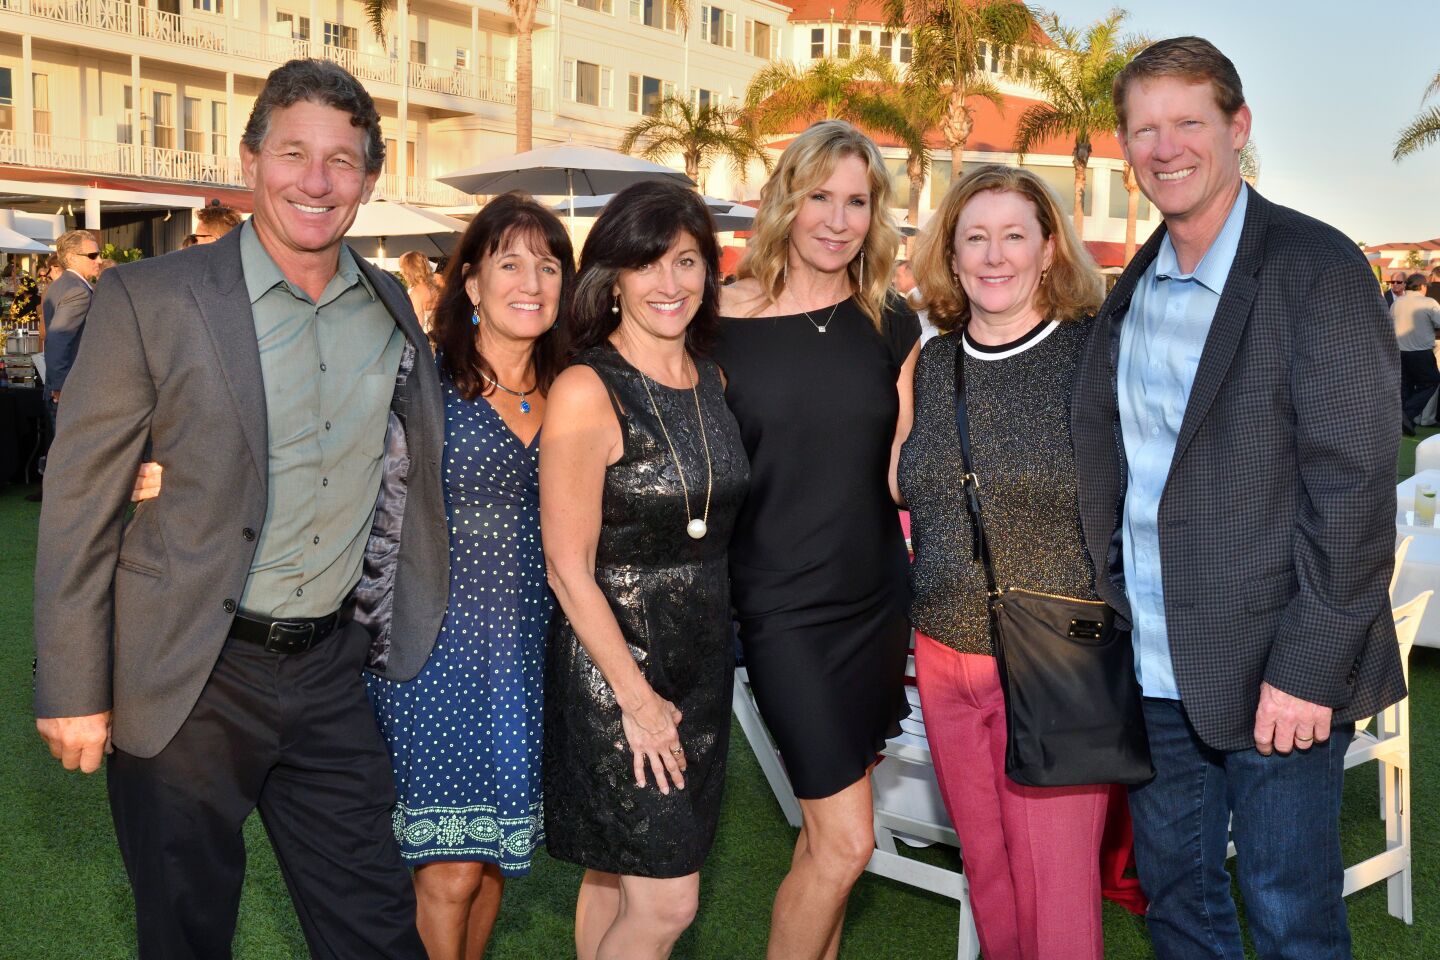 Jim and Jeanna Beauchamp, Misty Morgan, Linda Jacoby, Molly and Broc Glover